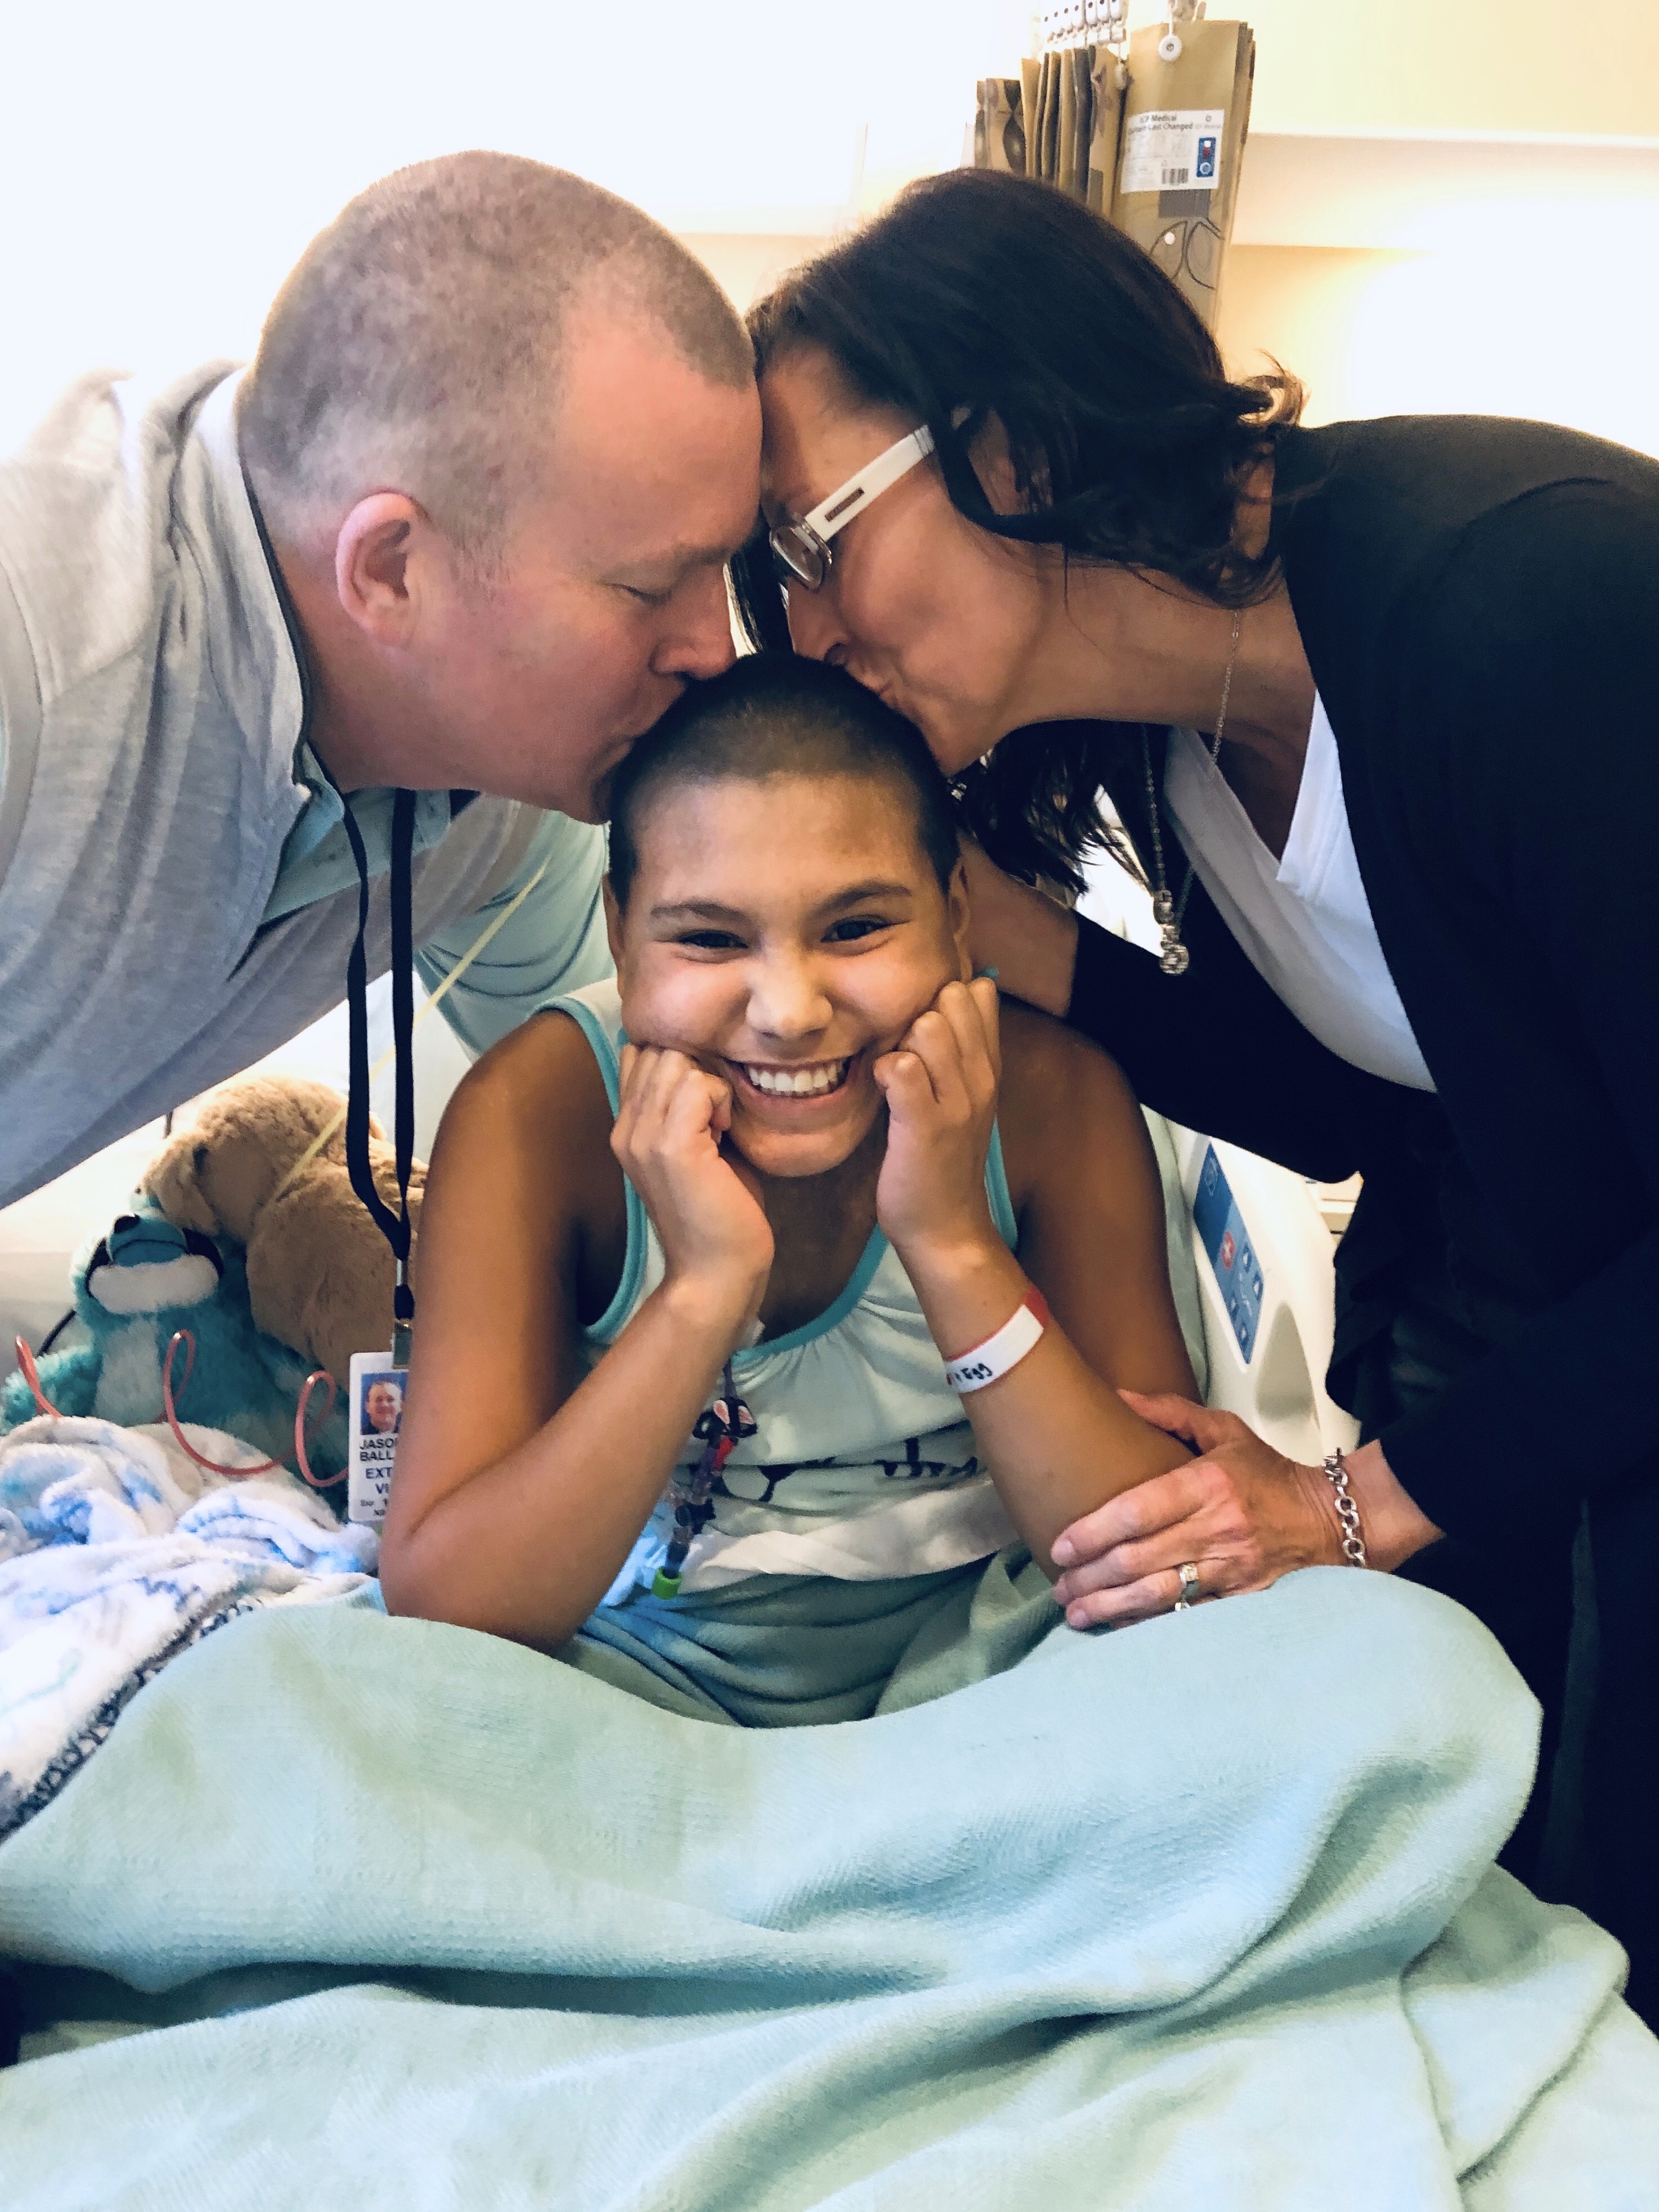 Emi receives kisses from her adoptive parents, Jason and Katie Ballard, at the NIH Clinical Center as she gets ready to receive a lifesaving hematopoietic stem cell transplant, the only way to cure her fatal immune deficiency, using cells donated by her birth mom.